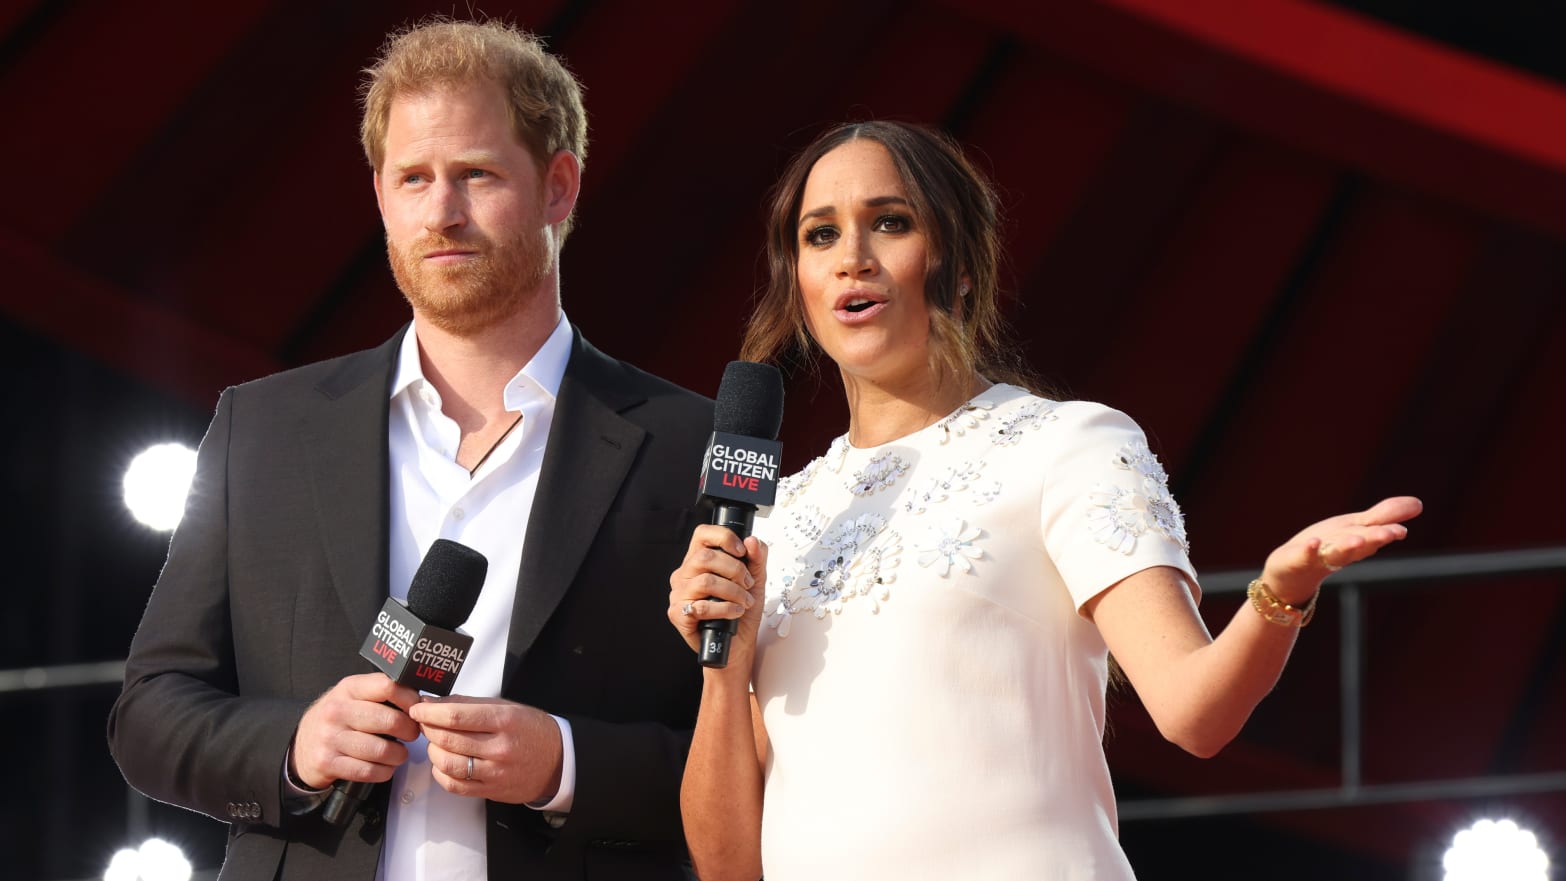 Prince Harry and Meghan Markle have officially moved out of Frogmore Cottage in Windsor after King Charles asked them to leave.